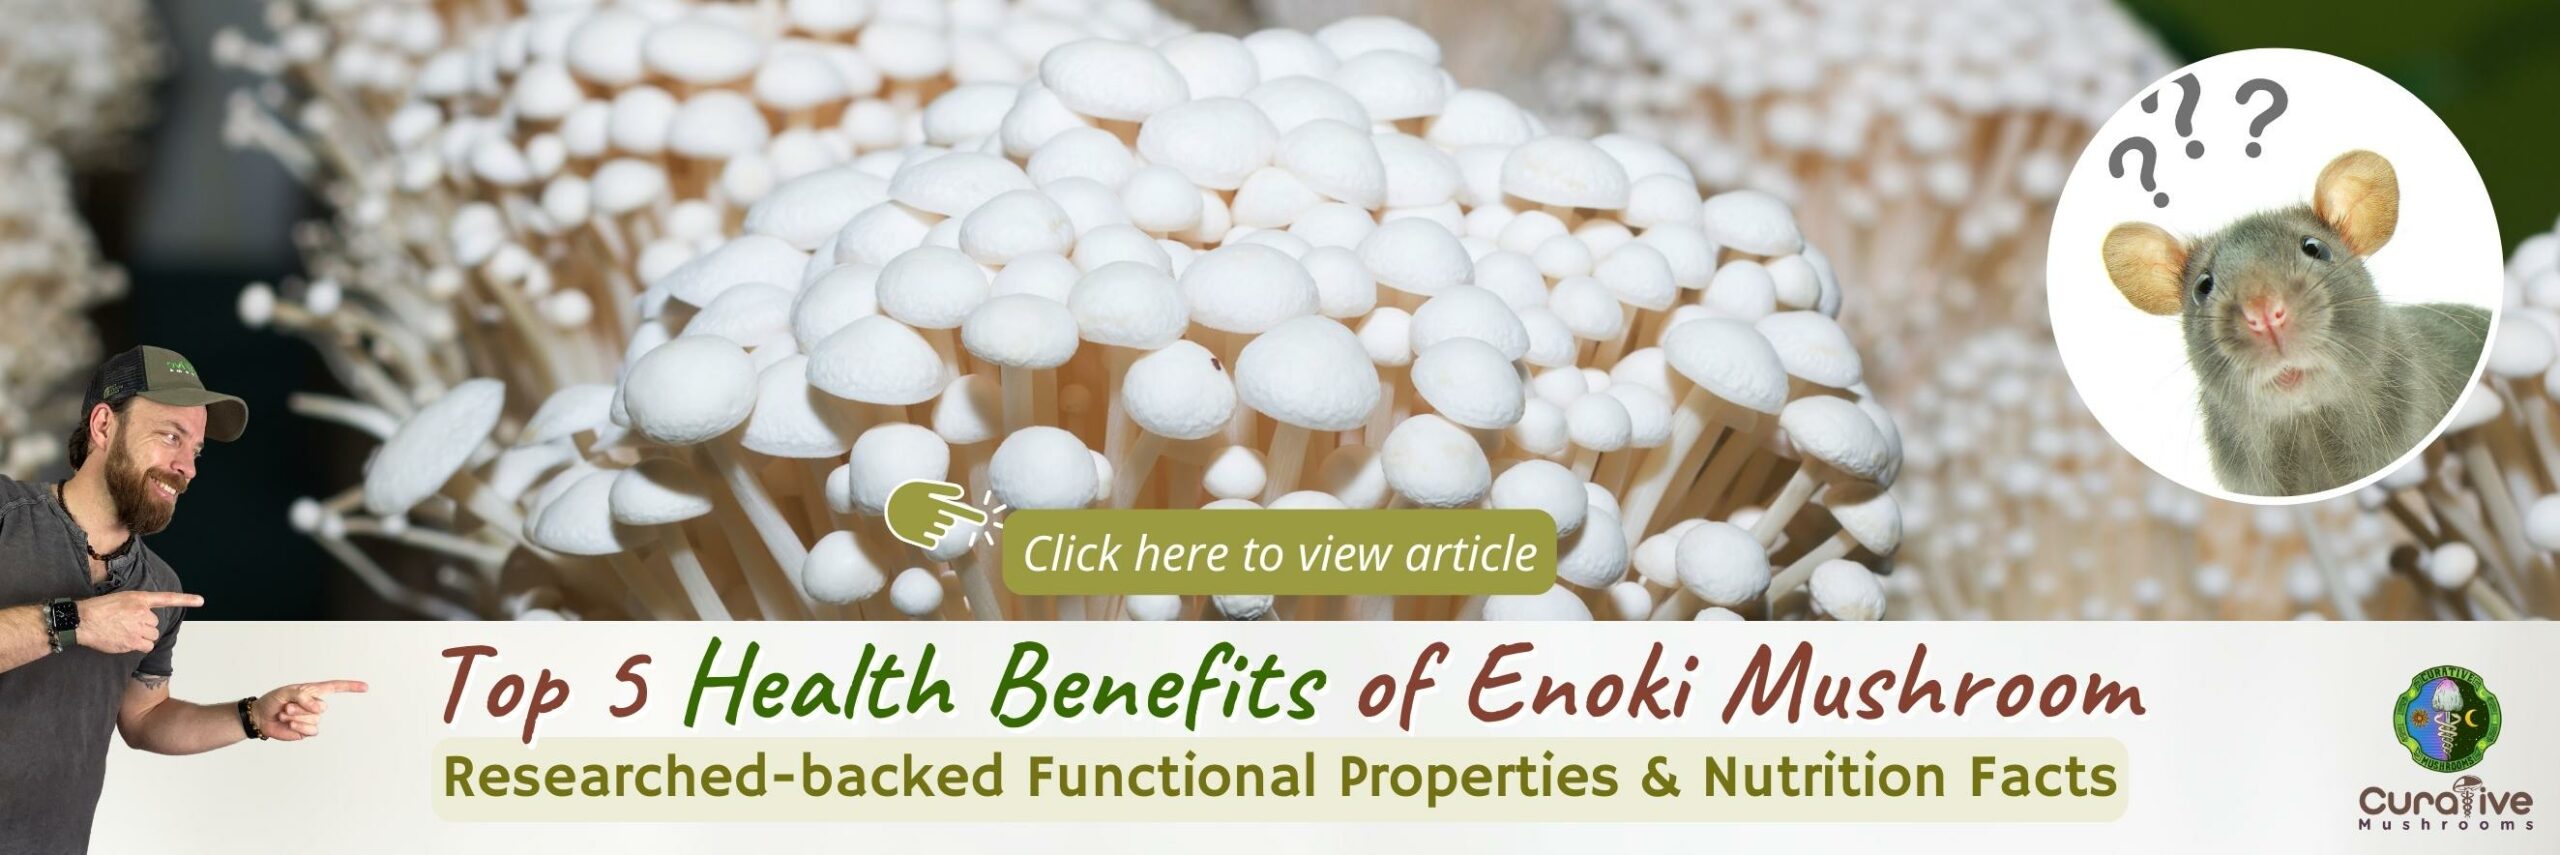 Top 5 Health Benefits of Enoki Mushroom - Researched-backed Functional Properties & Nutrition Facts - Click here to view article